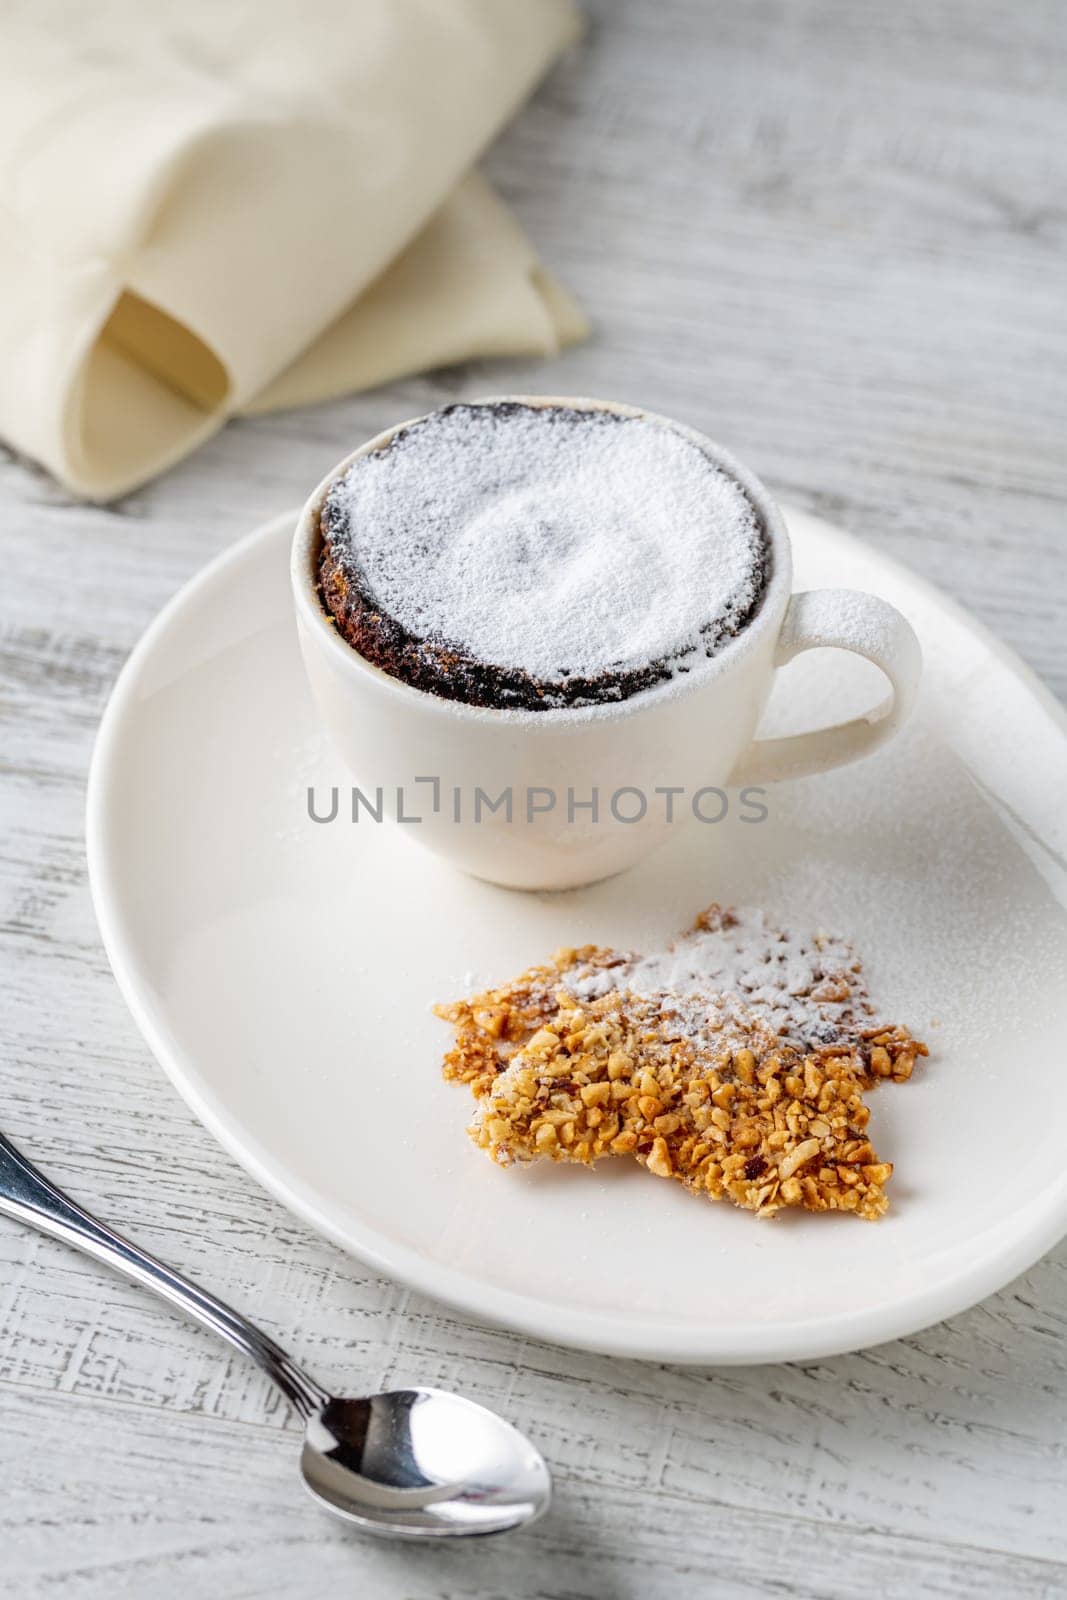 Chocolate souffle with flowing chocolate on a white porcelain plate